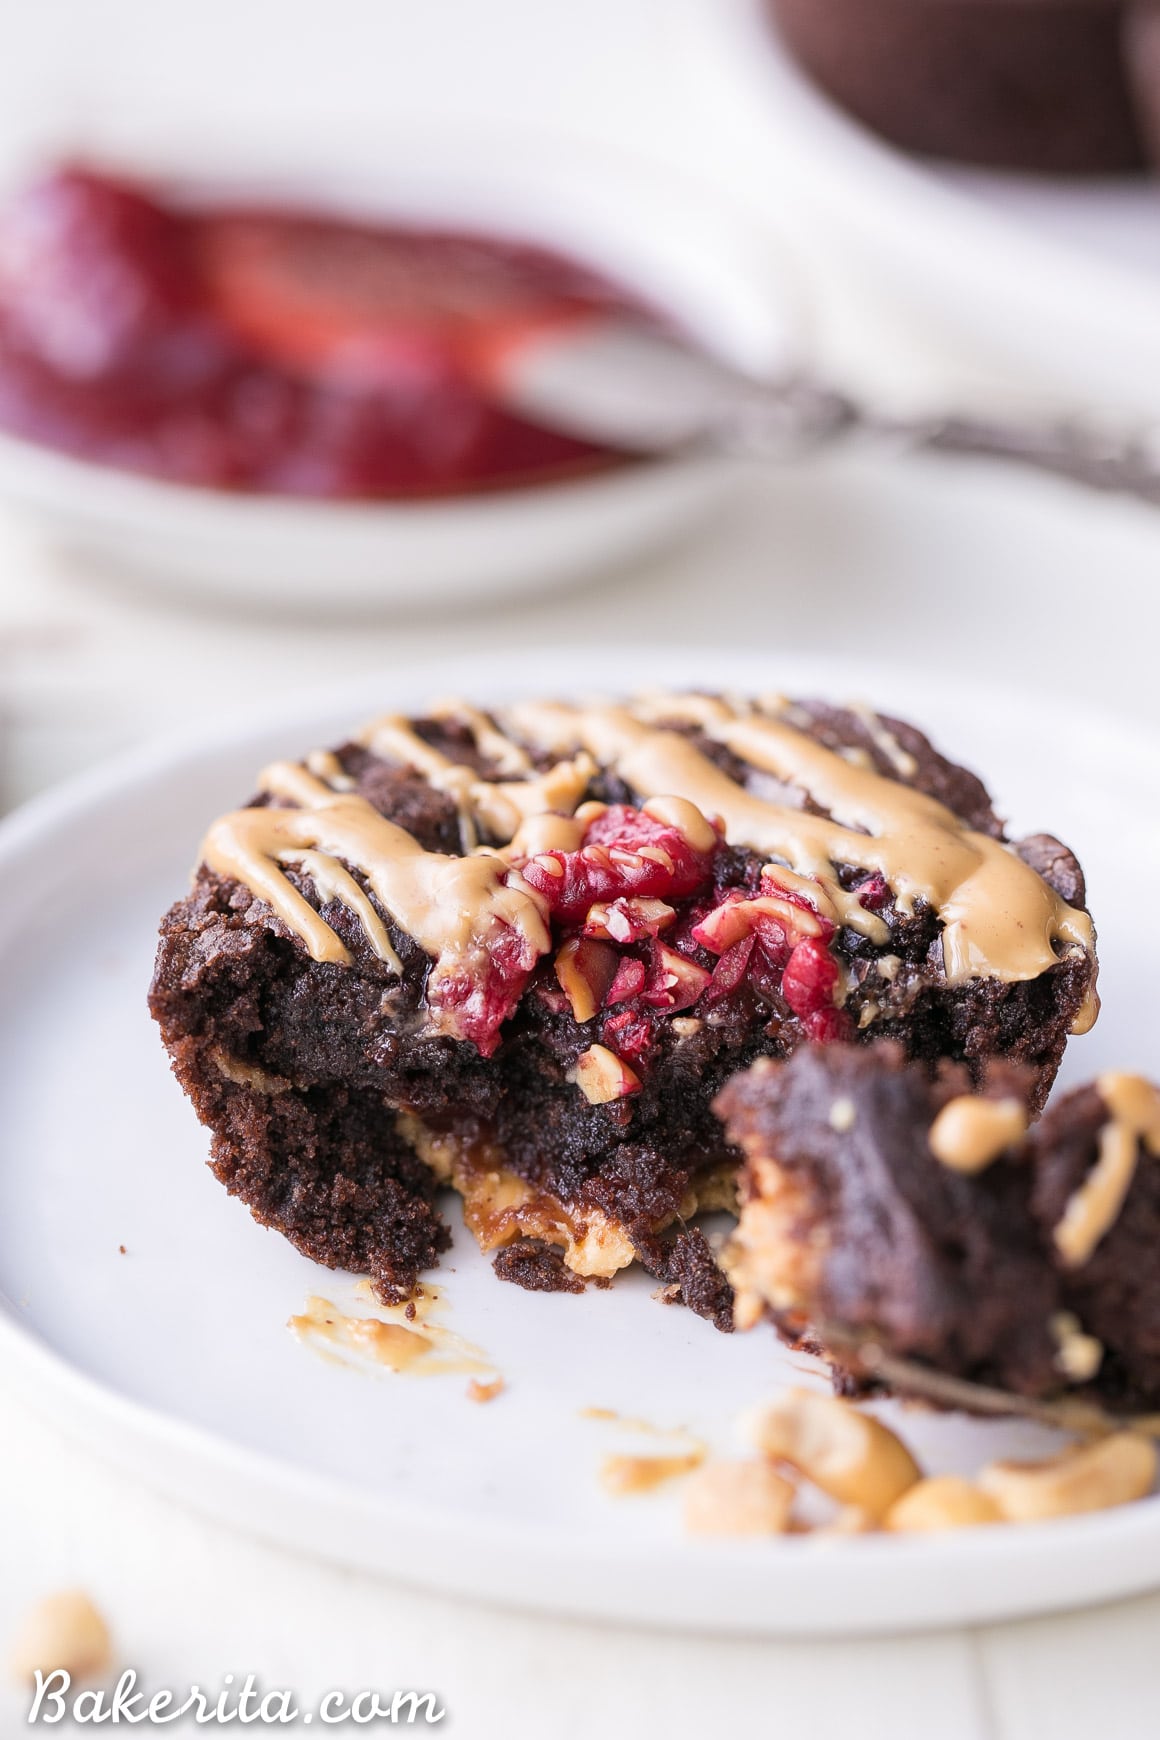 These Gluten Free Peanut Butter & Jelly Brownie Bites are fudgy and flavorful, with a surprise of peanut butter and jelly on the inside of each brownie! If you're a peanut butter & jelly fan, you're going to love these.